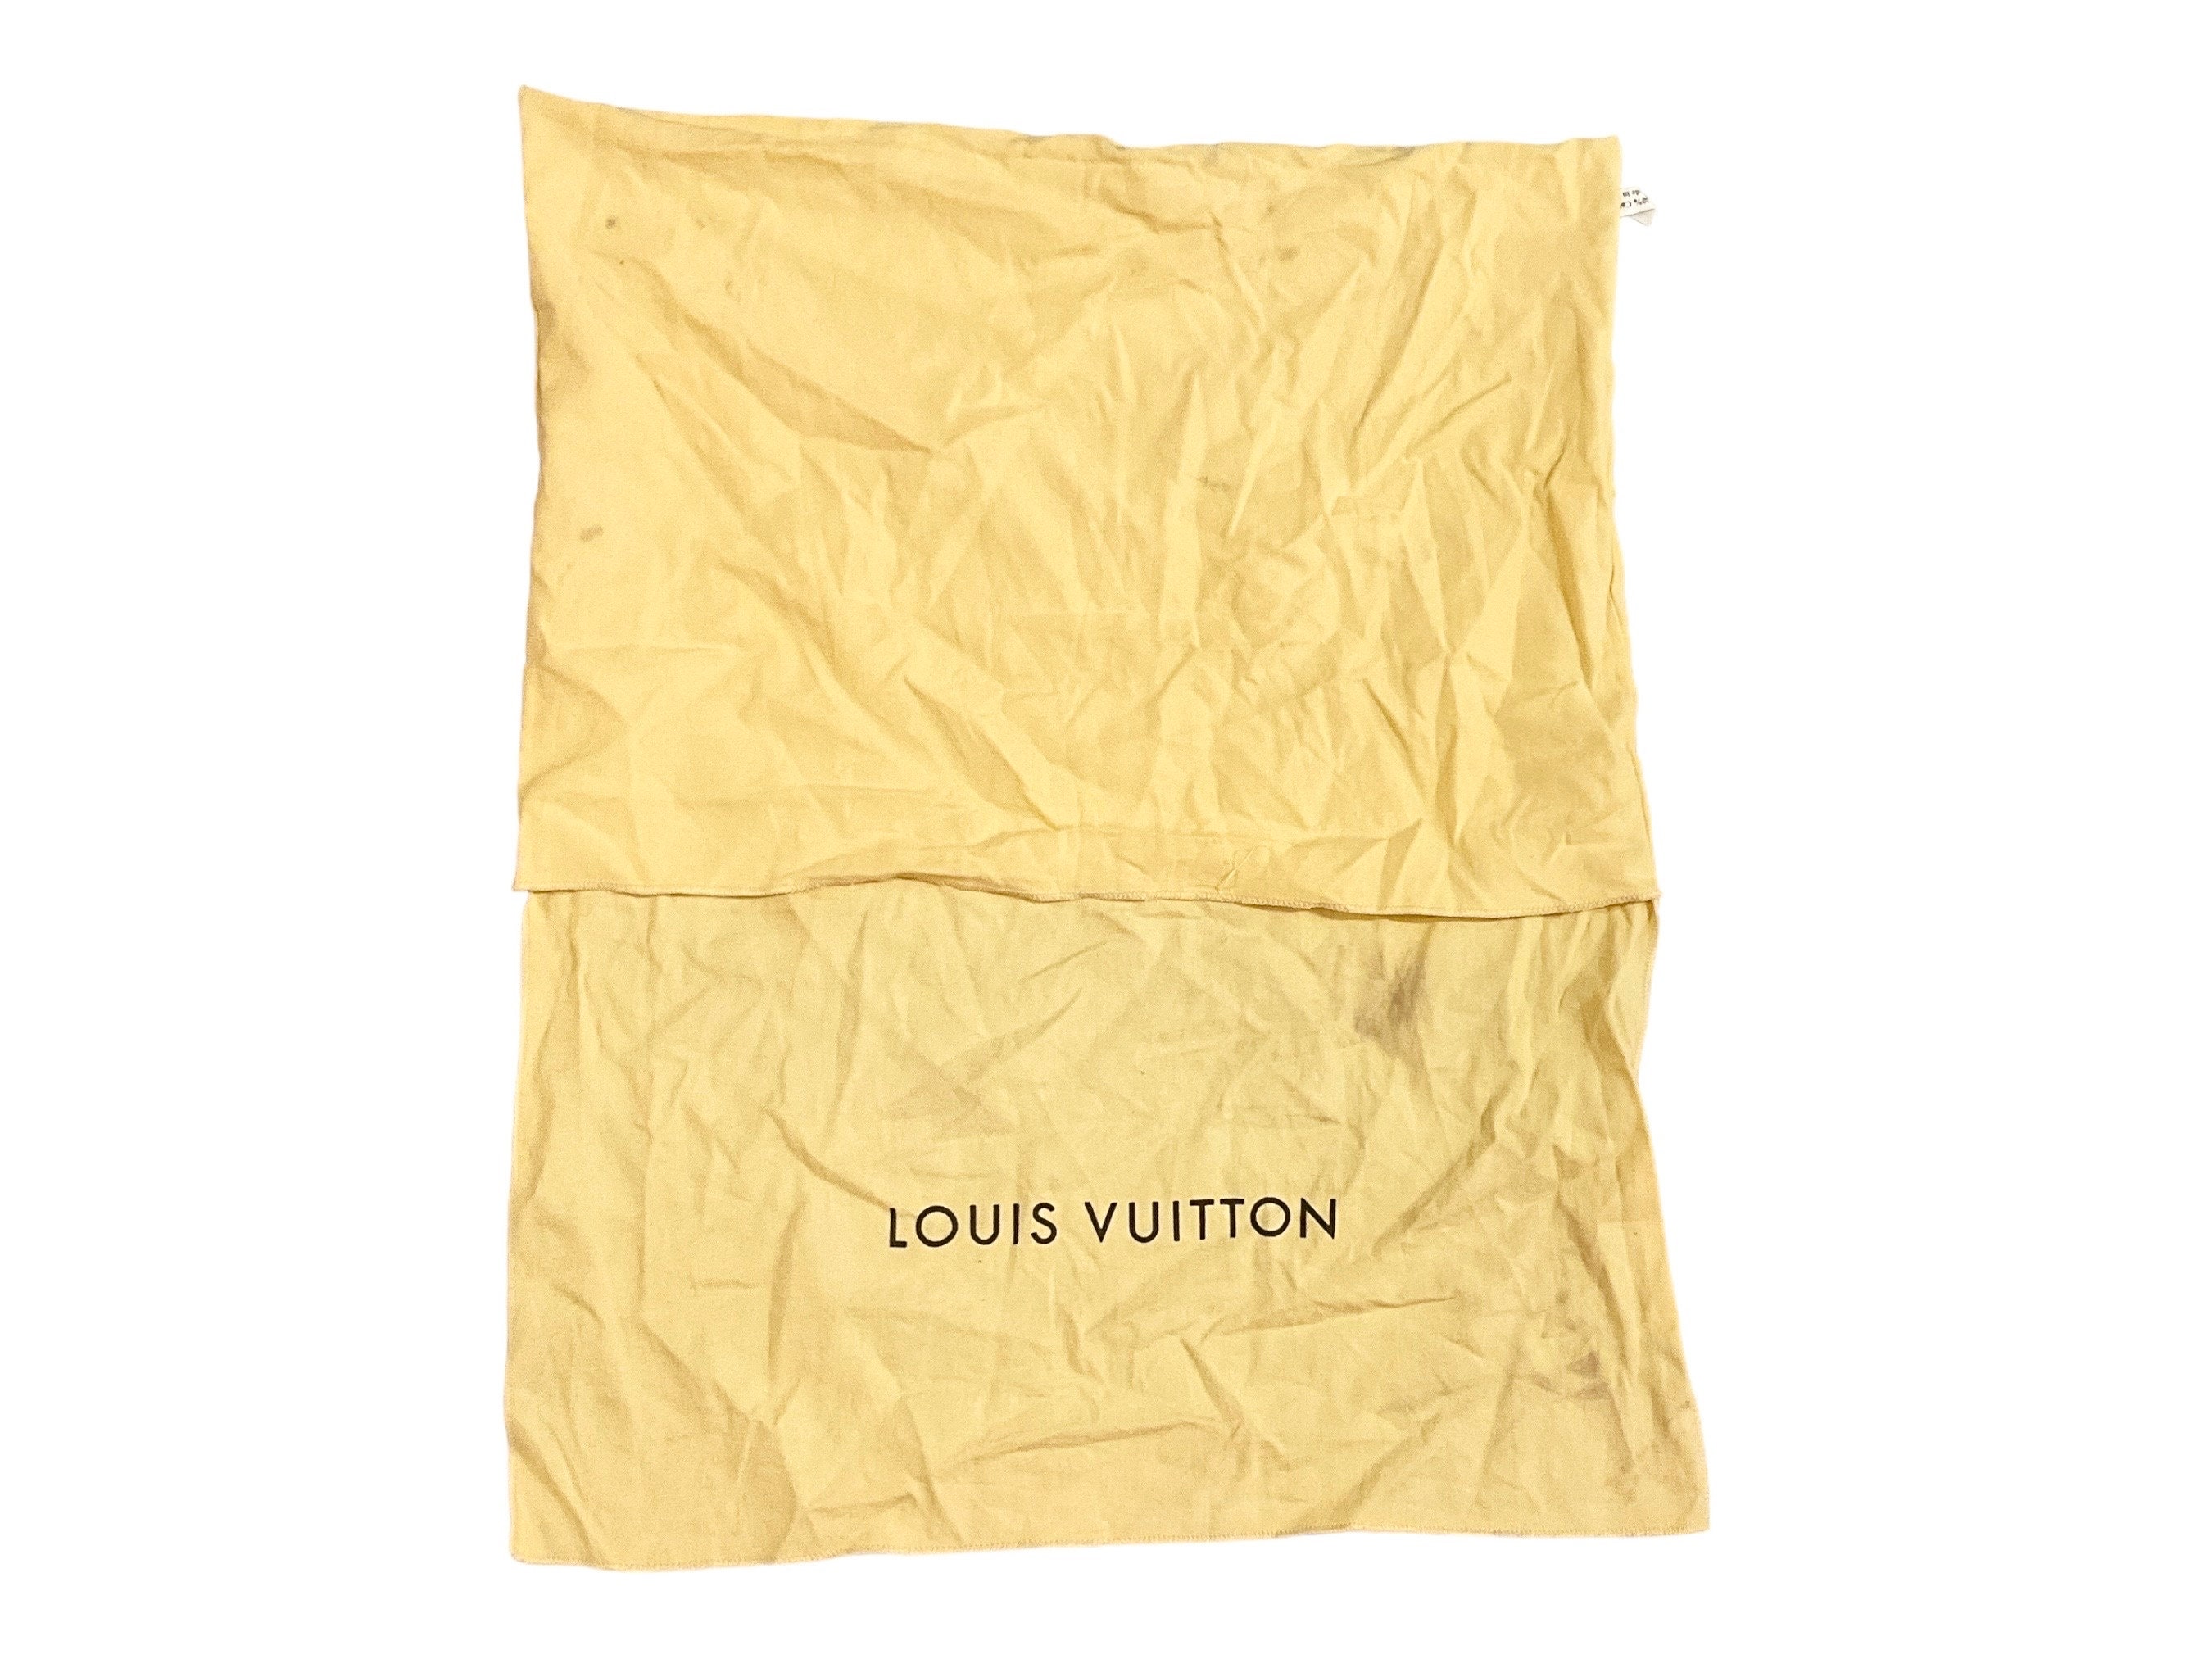 Buy LOUIS VUITTON Bag for Footwear Bag for Clothes Protective Online in  India 